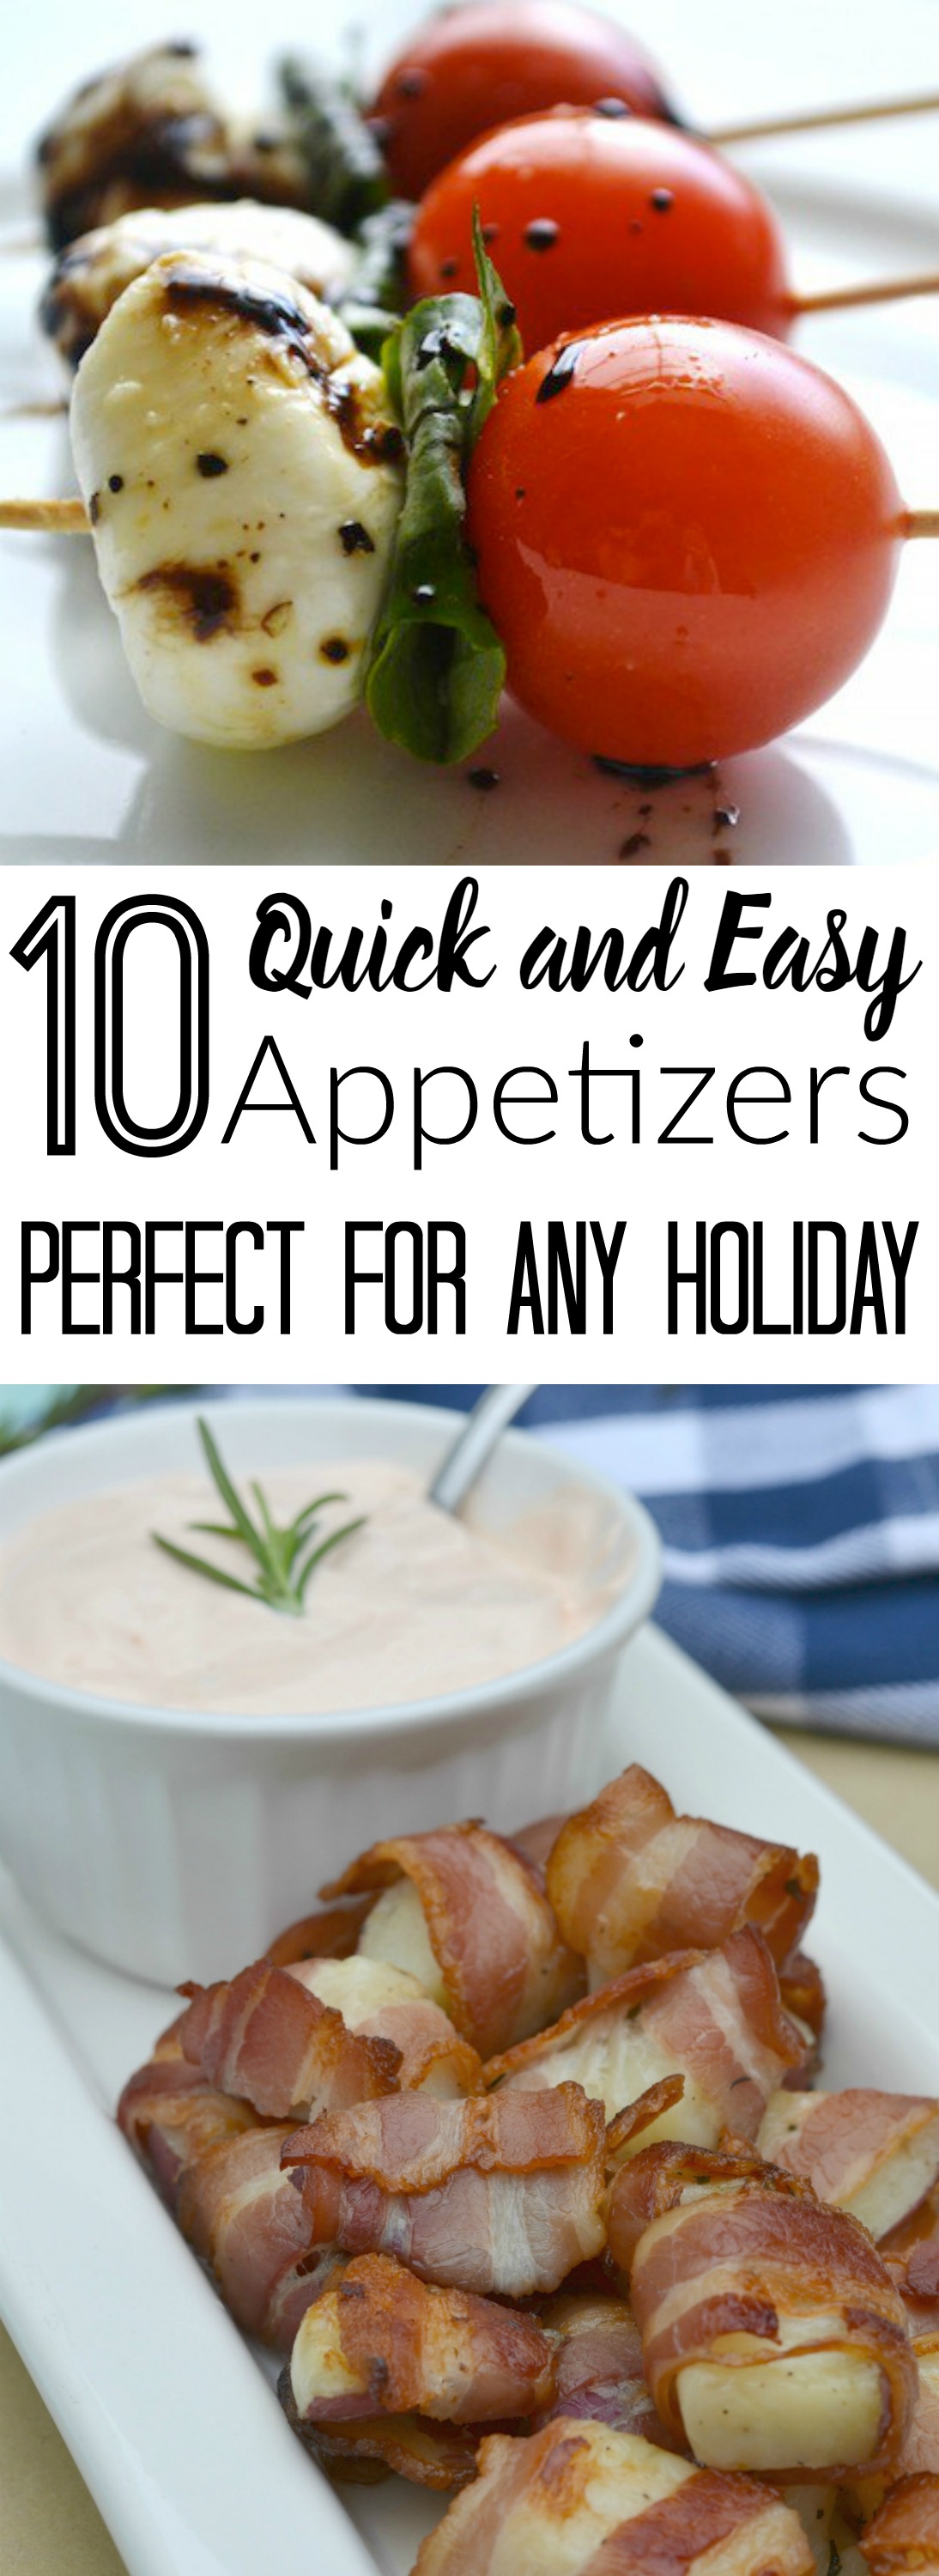 10 Quick and Easy Holiday Appetizers